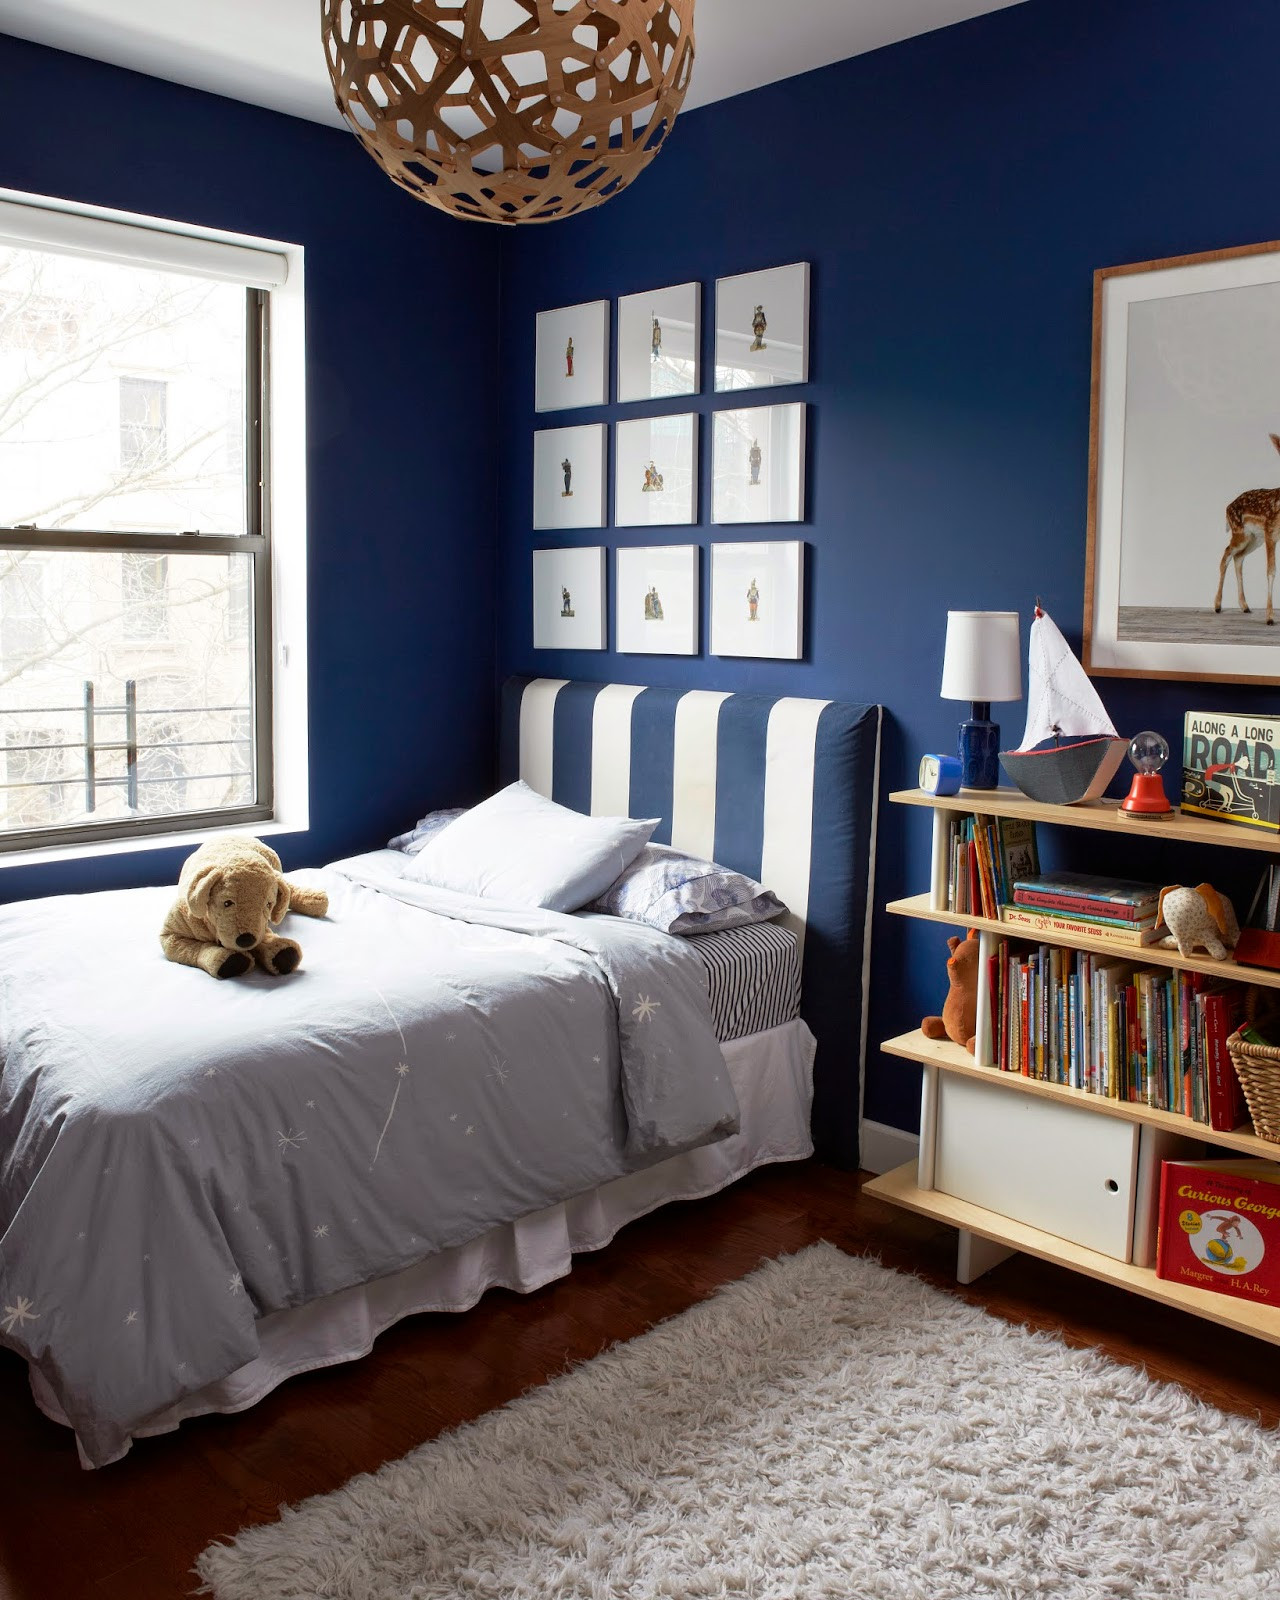 Boys Bedroom Paint
 Help Which Bedroom Paint Color Would You Choose